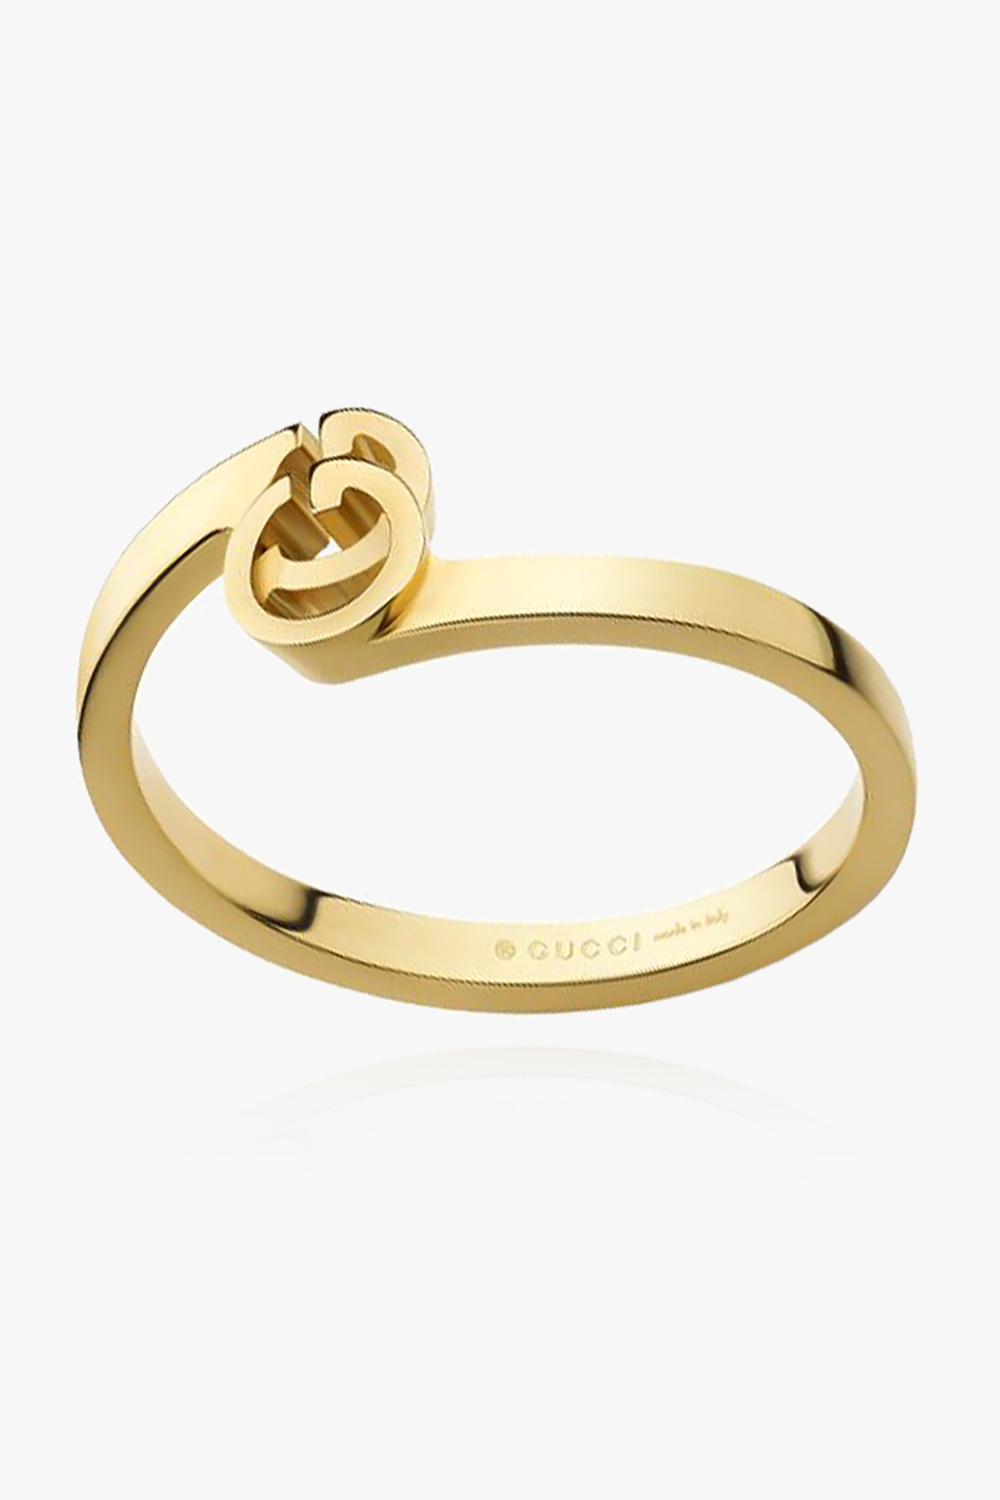 gucci double Yellow gold ring